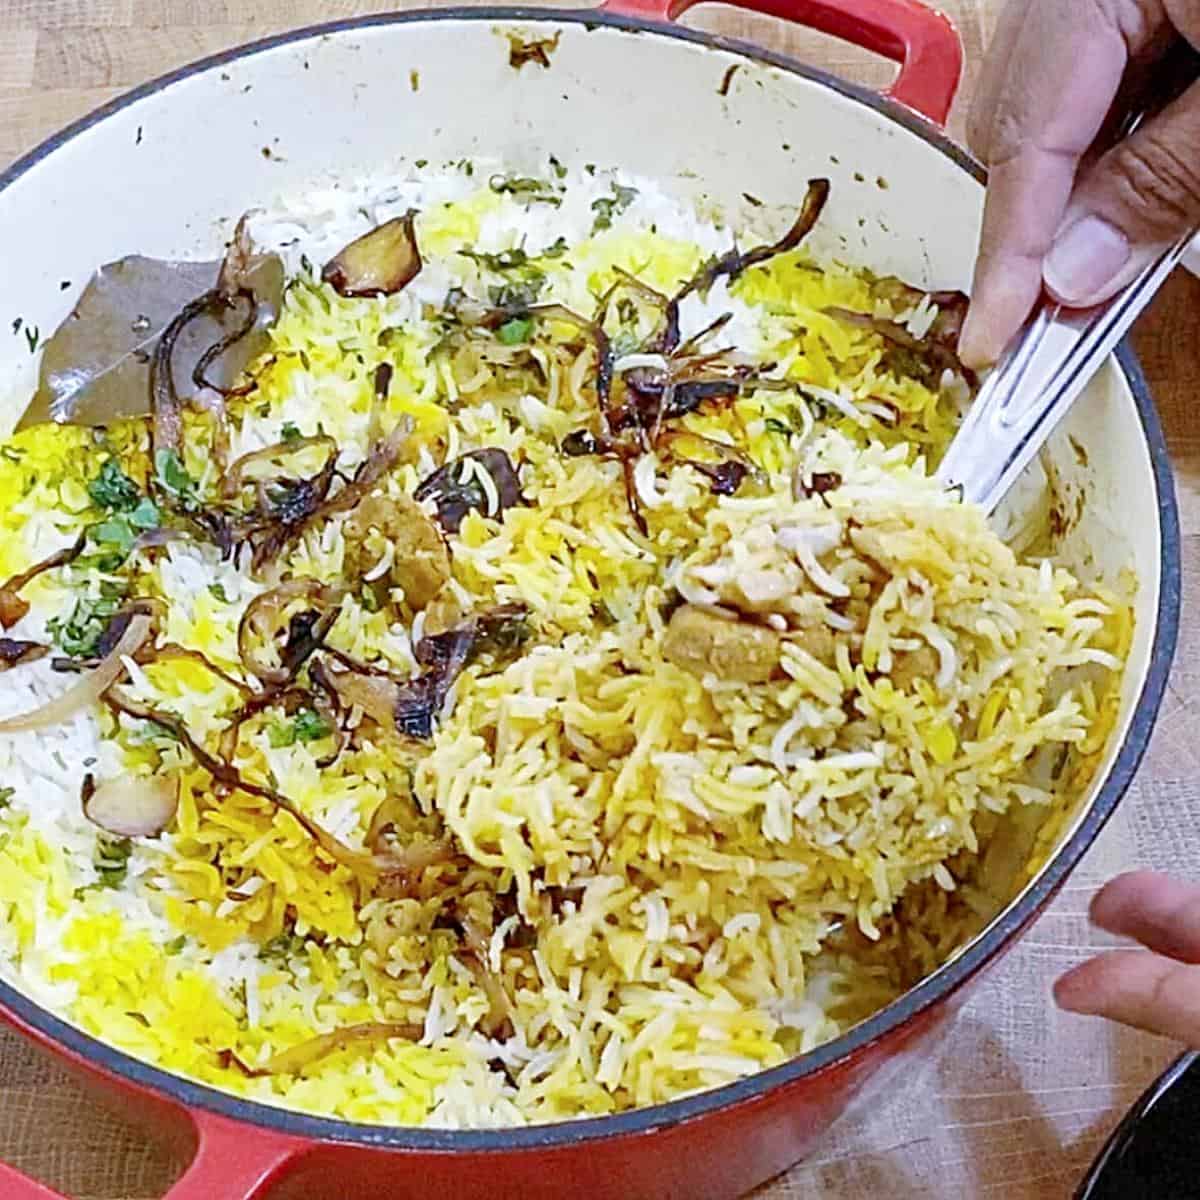 A Dutch oven with biryani made with chicken.